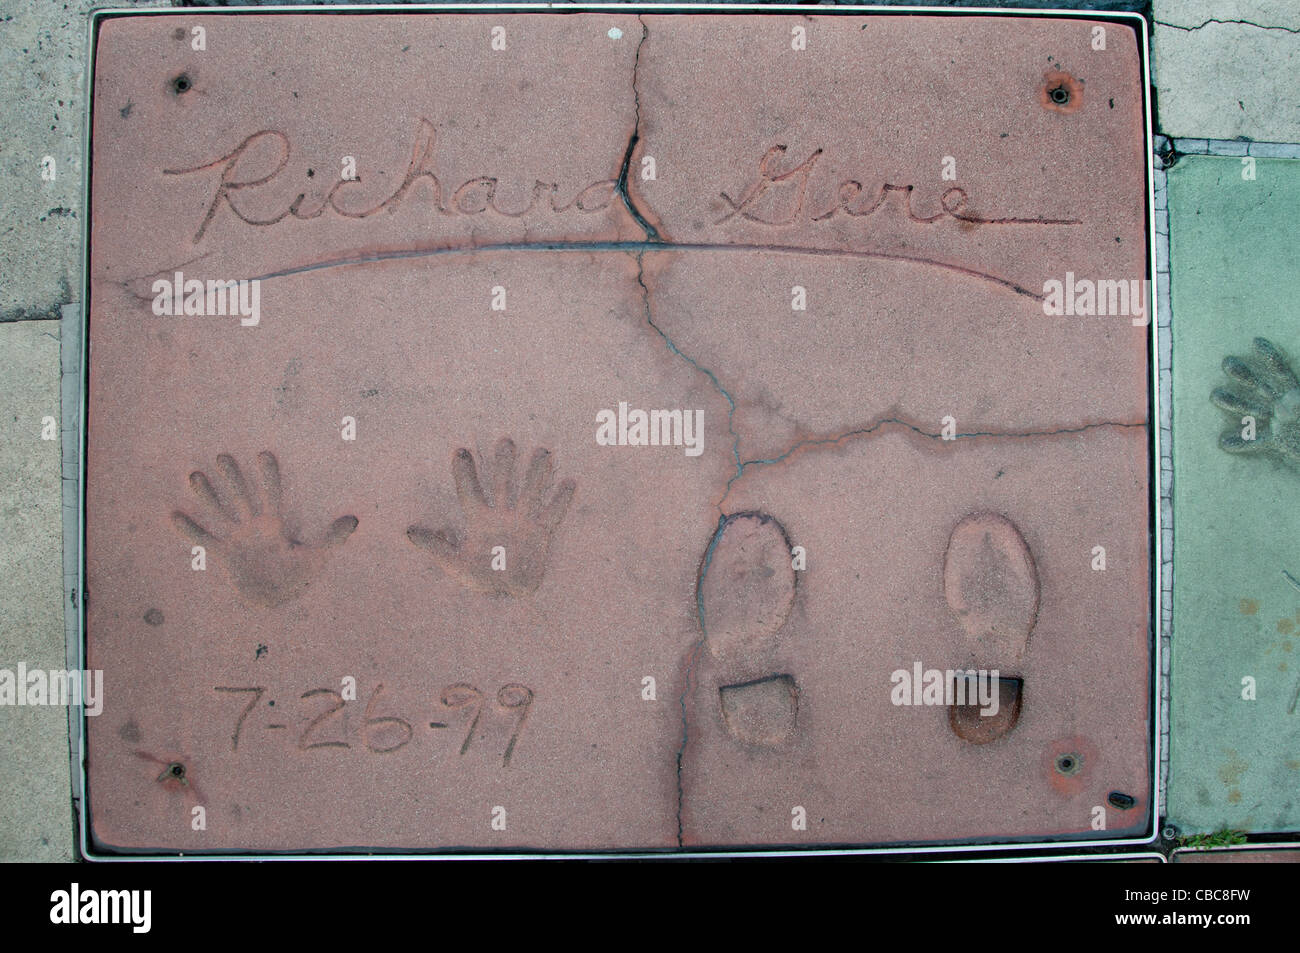 Richard Tiffany Gere Hand Fuß Drucke Pflasterung Chinese Theater in Hollywood Boulevard in Los Angeles Stockfoto